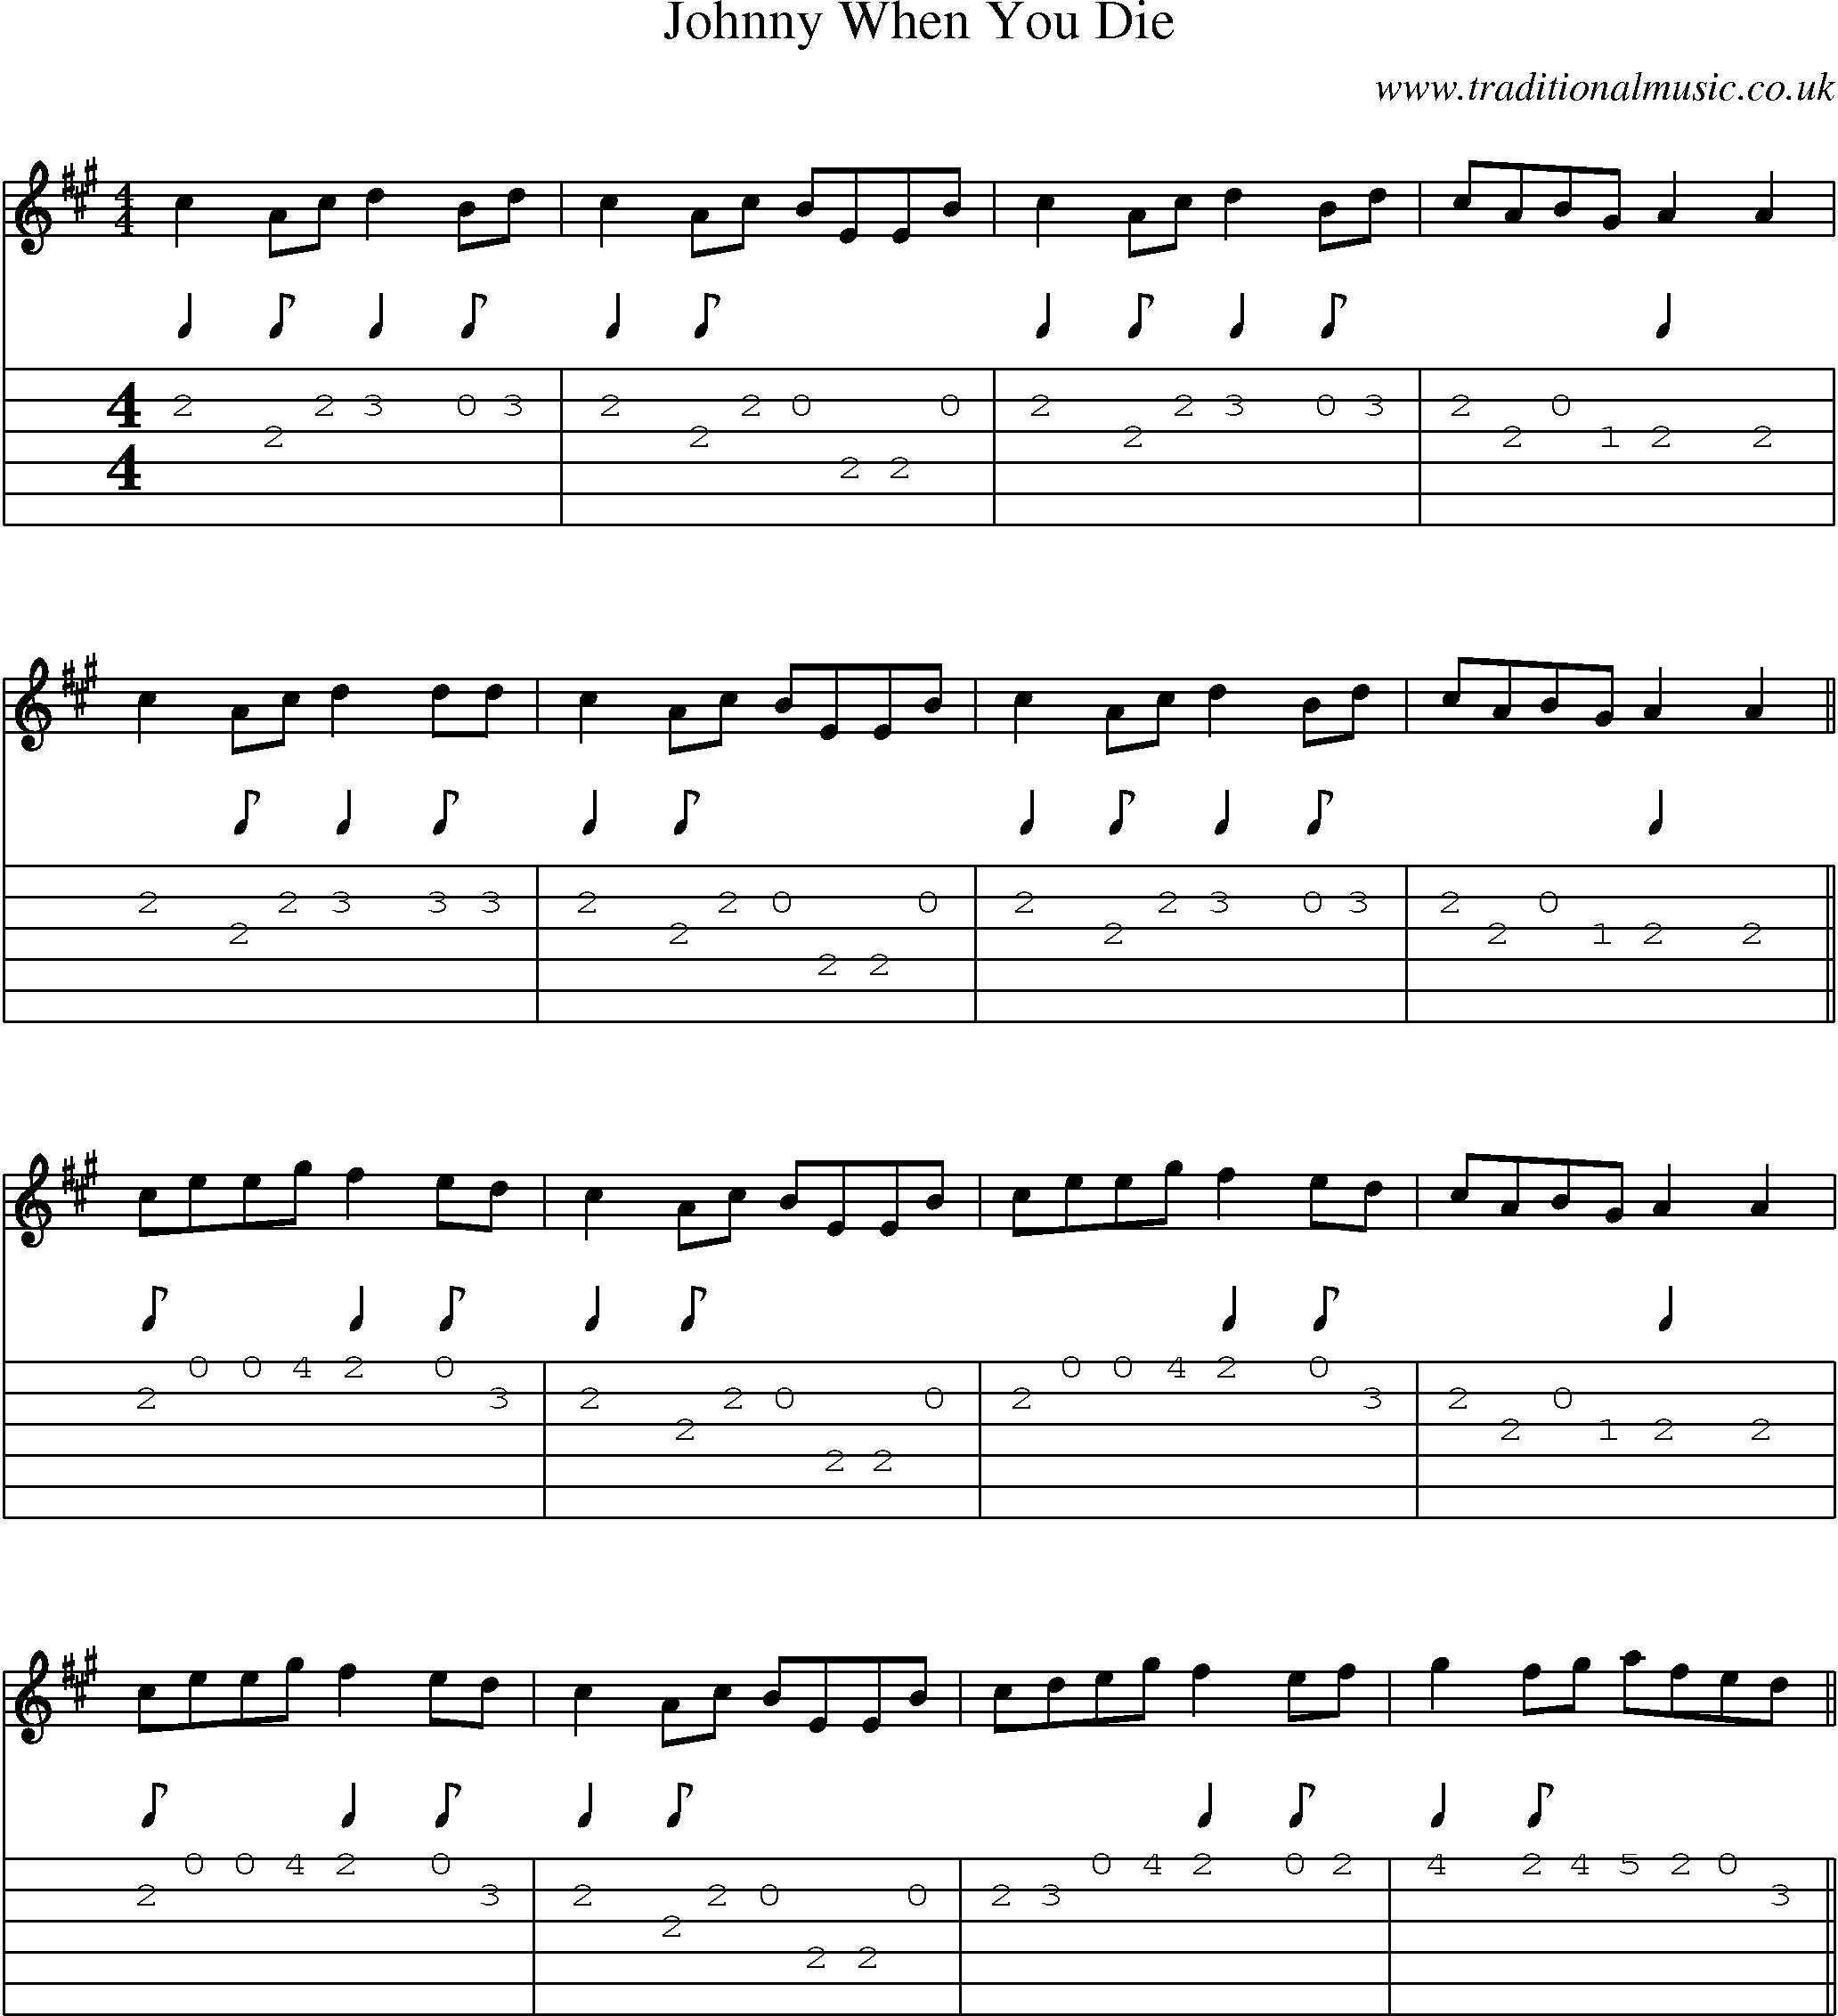 Music Score and Guitar Tabs for Johnny When You Die